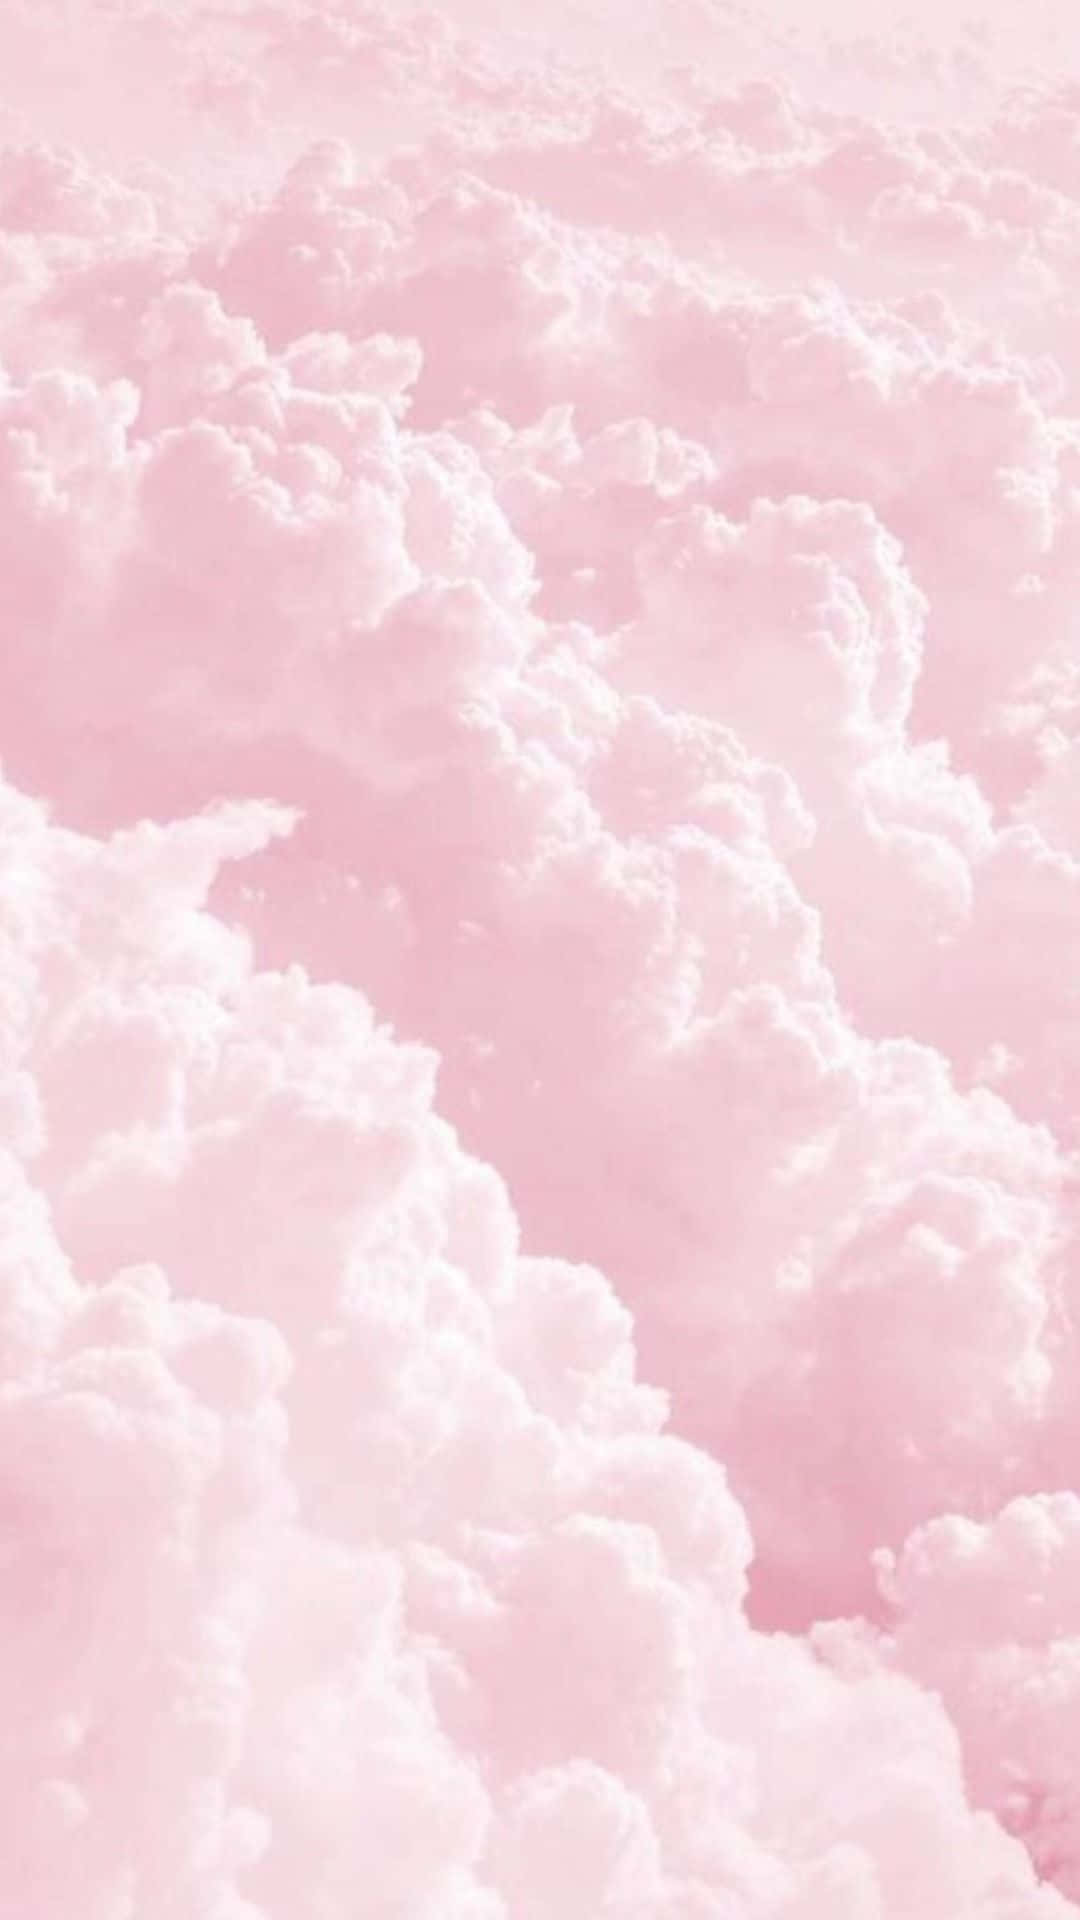 Up in the Clouds Wallpaper